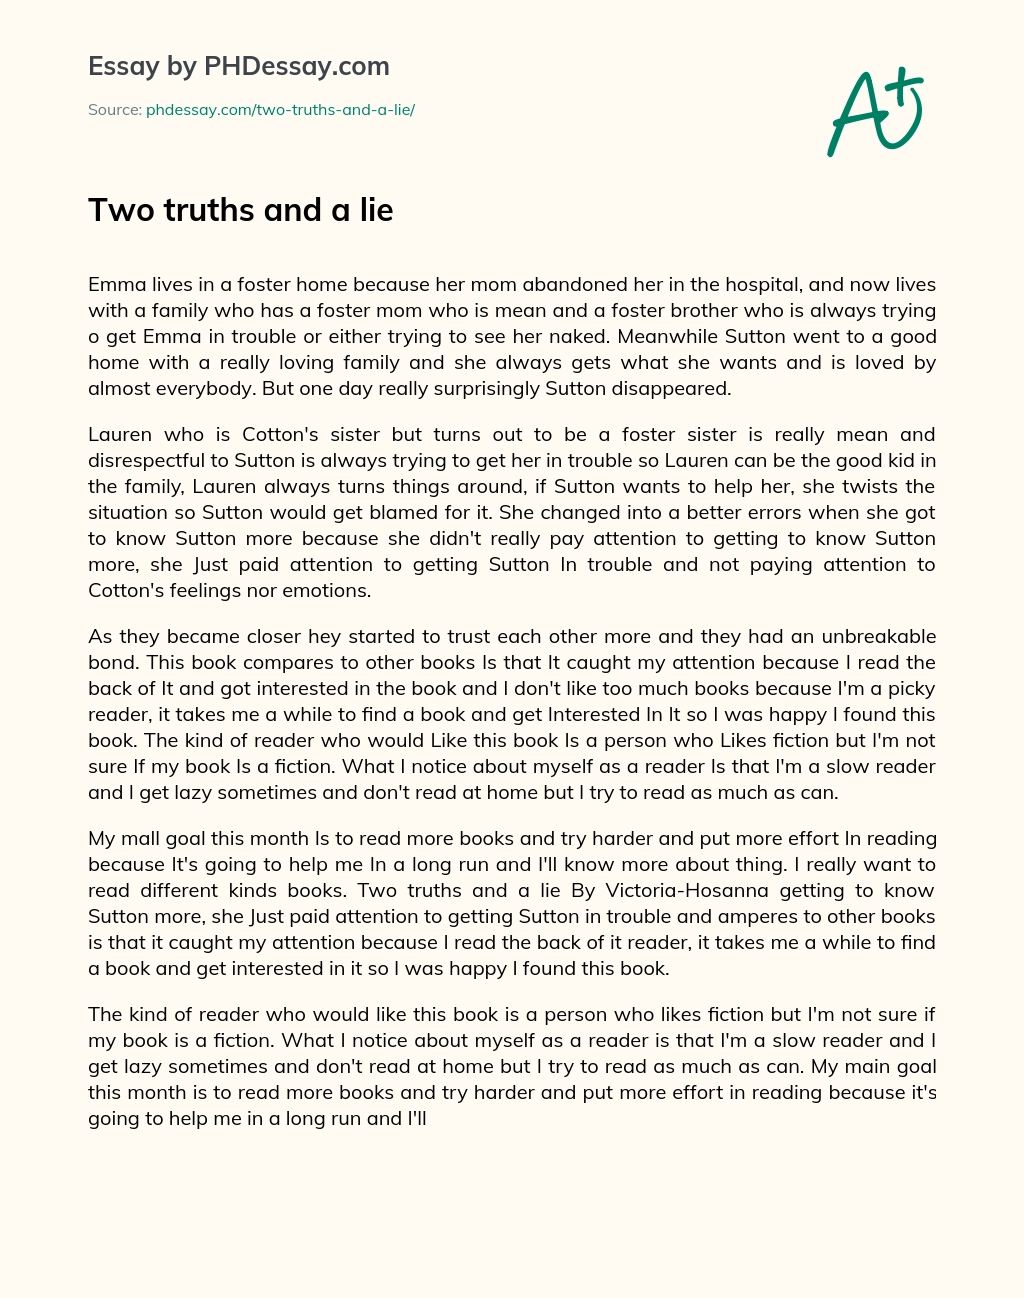 Two truths and a lie essay